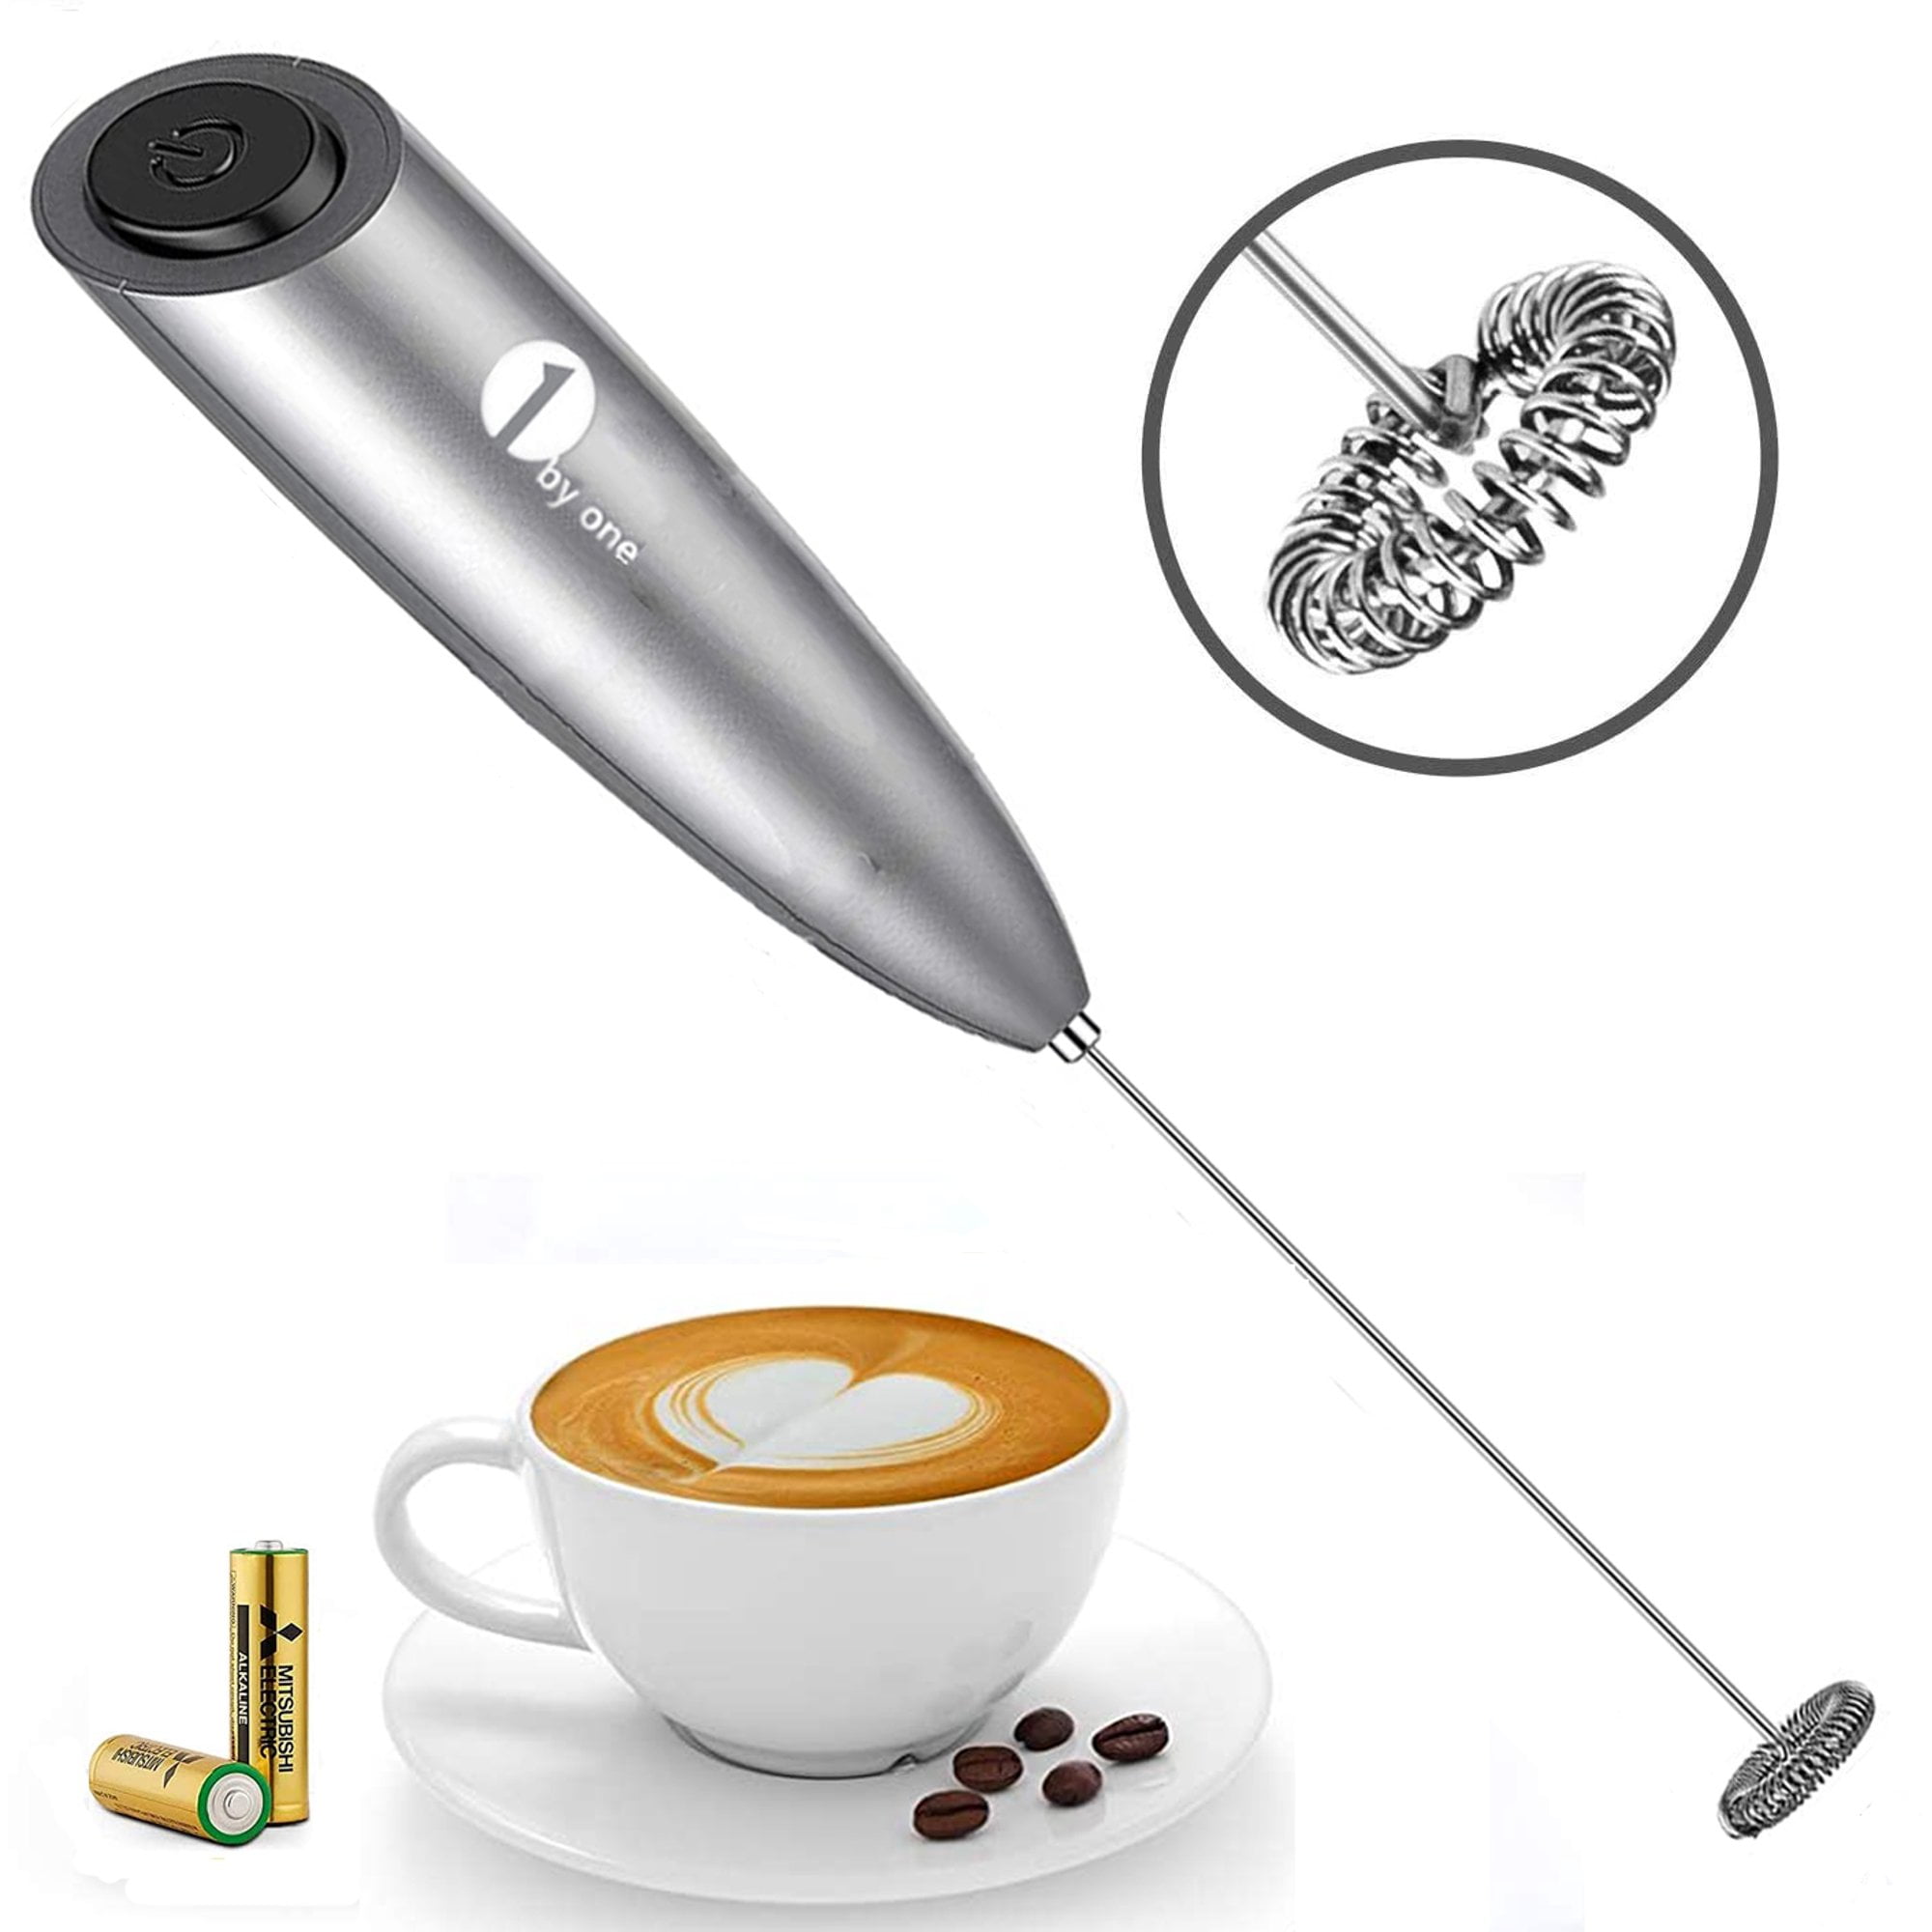  SIMPLETaste Milk Frother Handheld Battery Operated Electric  Foam Maker, Drink Mixer with Stainless Steel Whisk and Stand for  Cappuccino, Bulletproof Coffee, Latte: Home & Kitchen